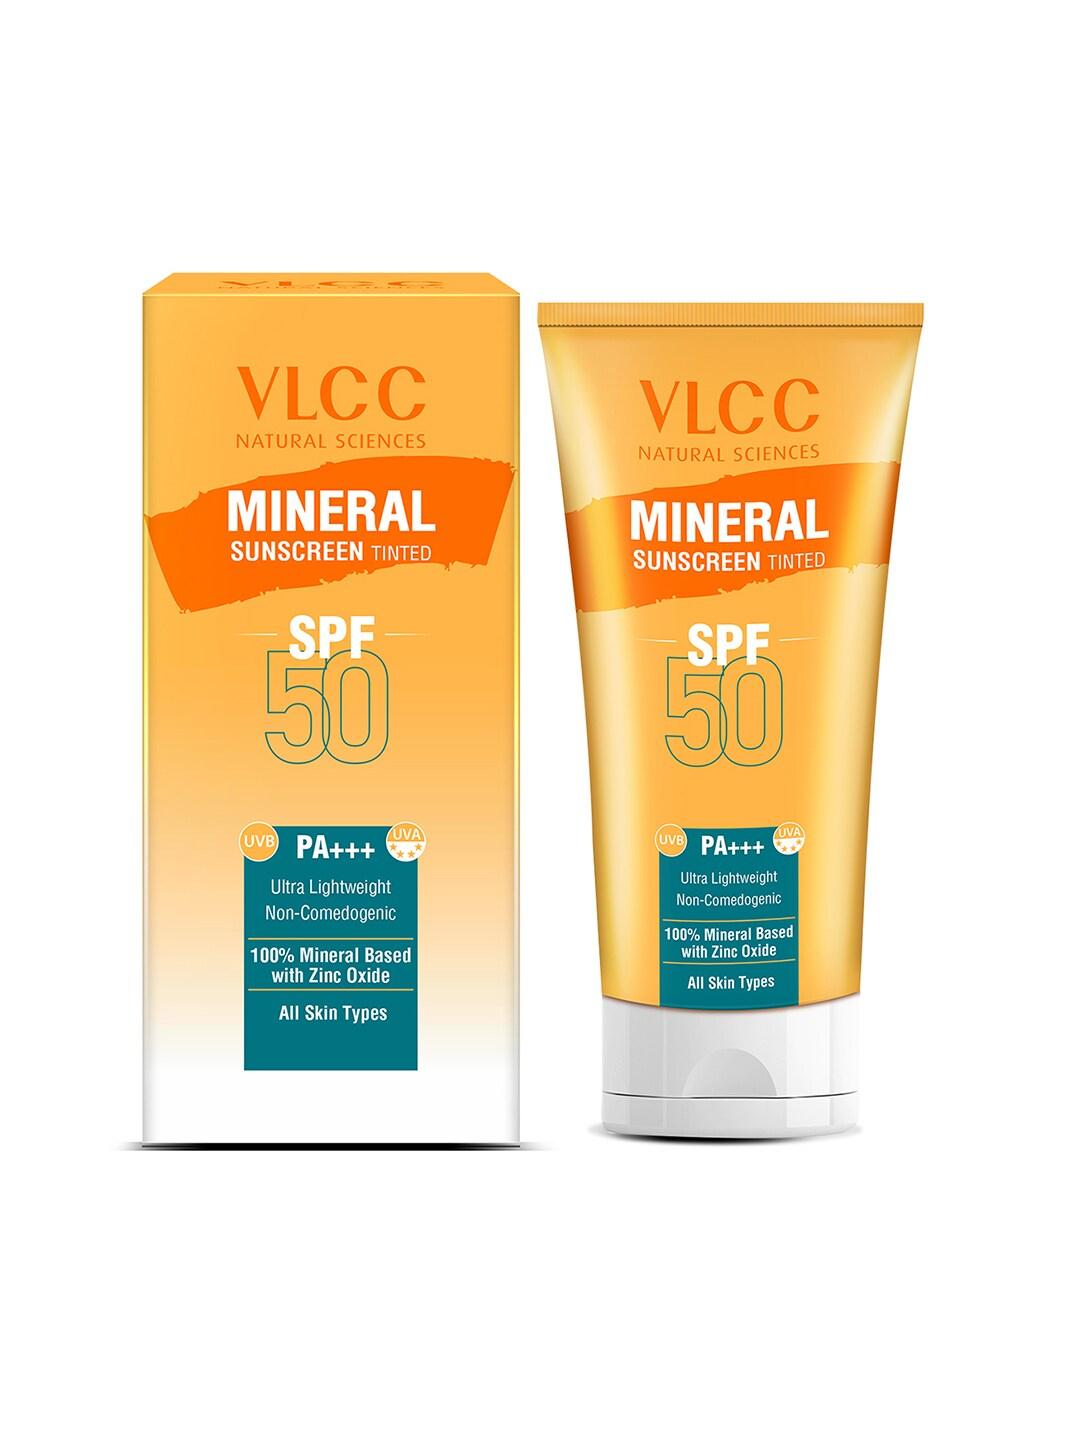 VLCC Natural Sciences Mineral Tinted SPF 50 Lightweight Non-Comedogenic Sunscreen - 50 g